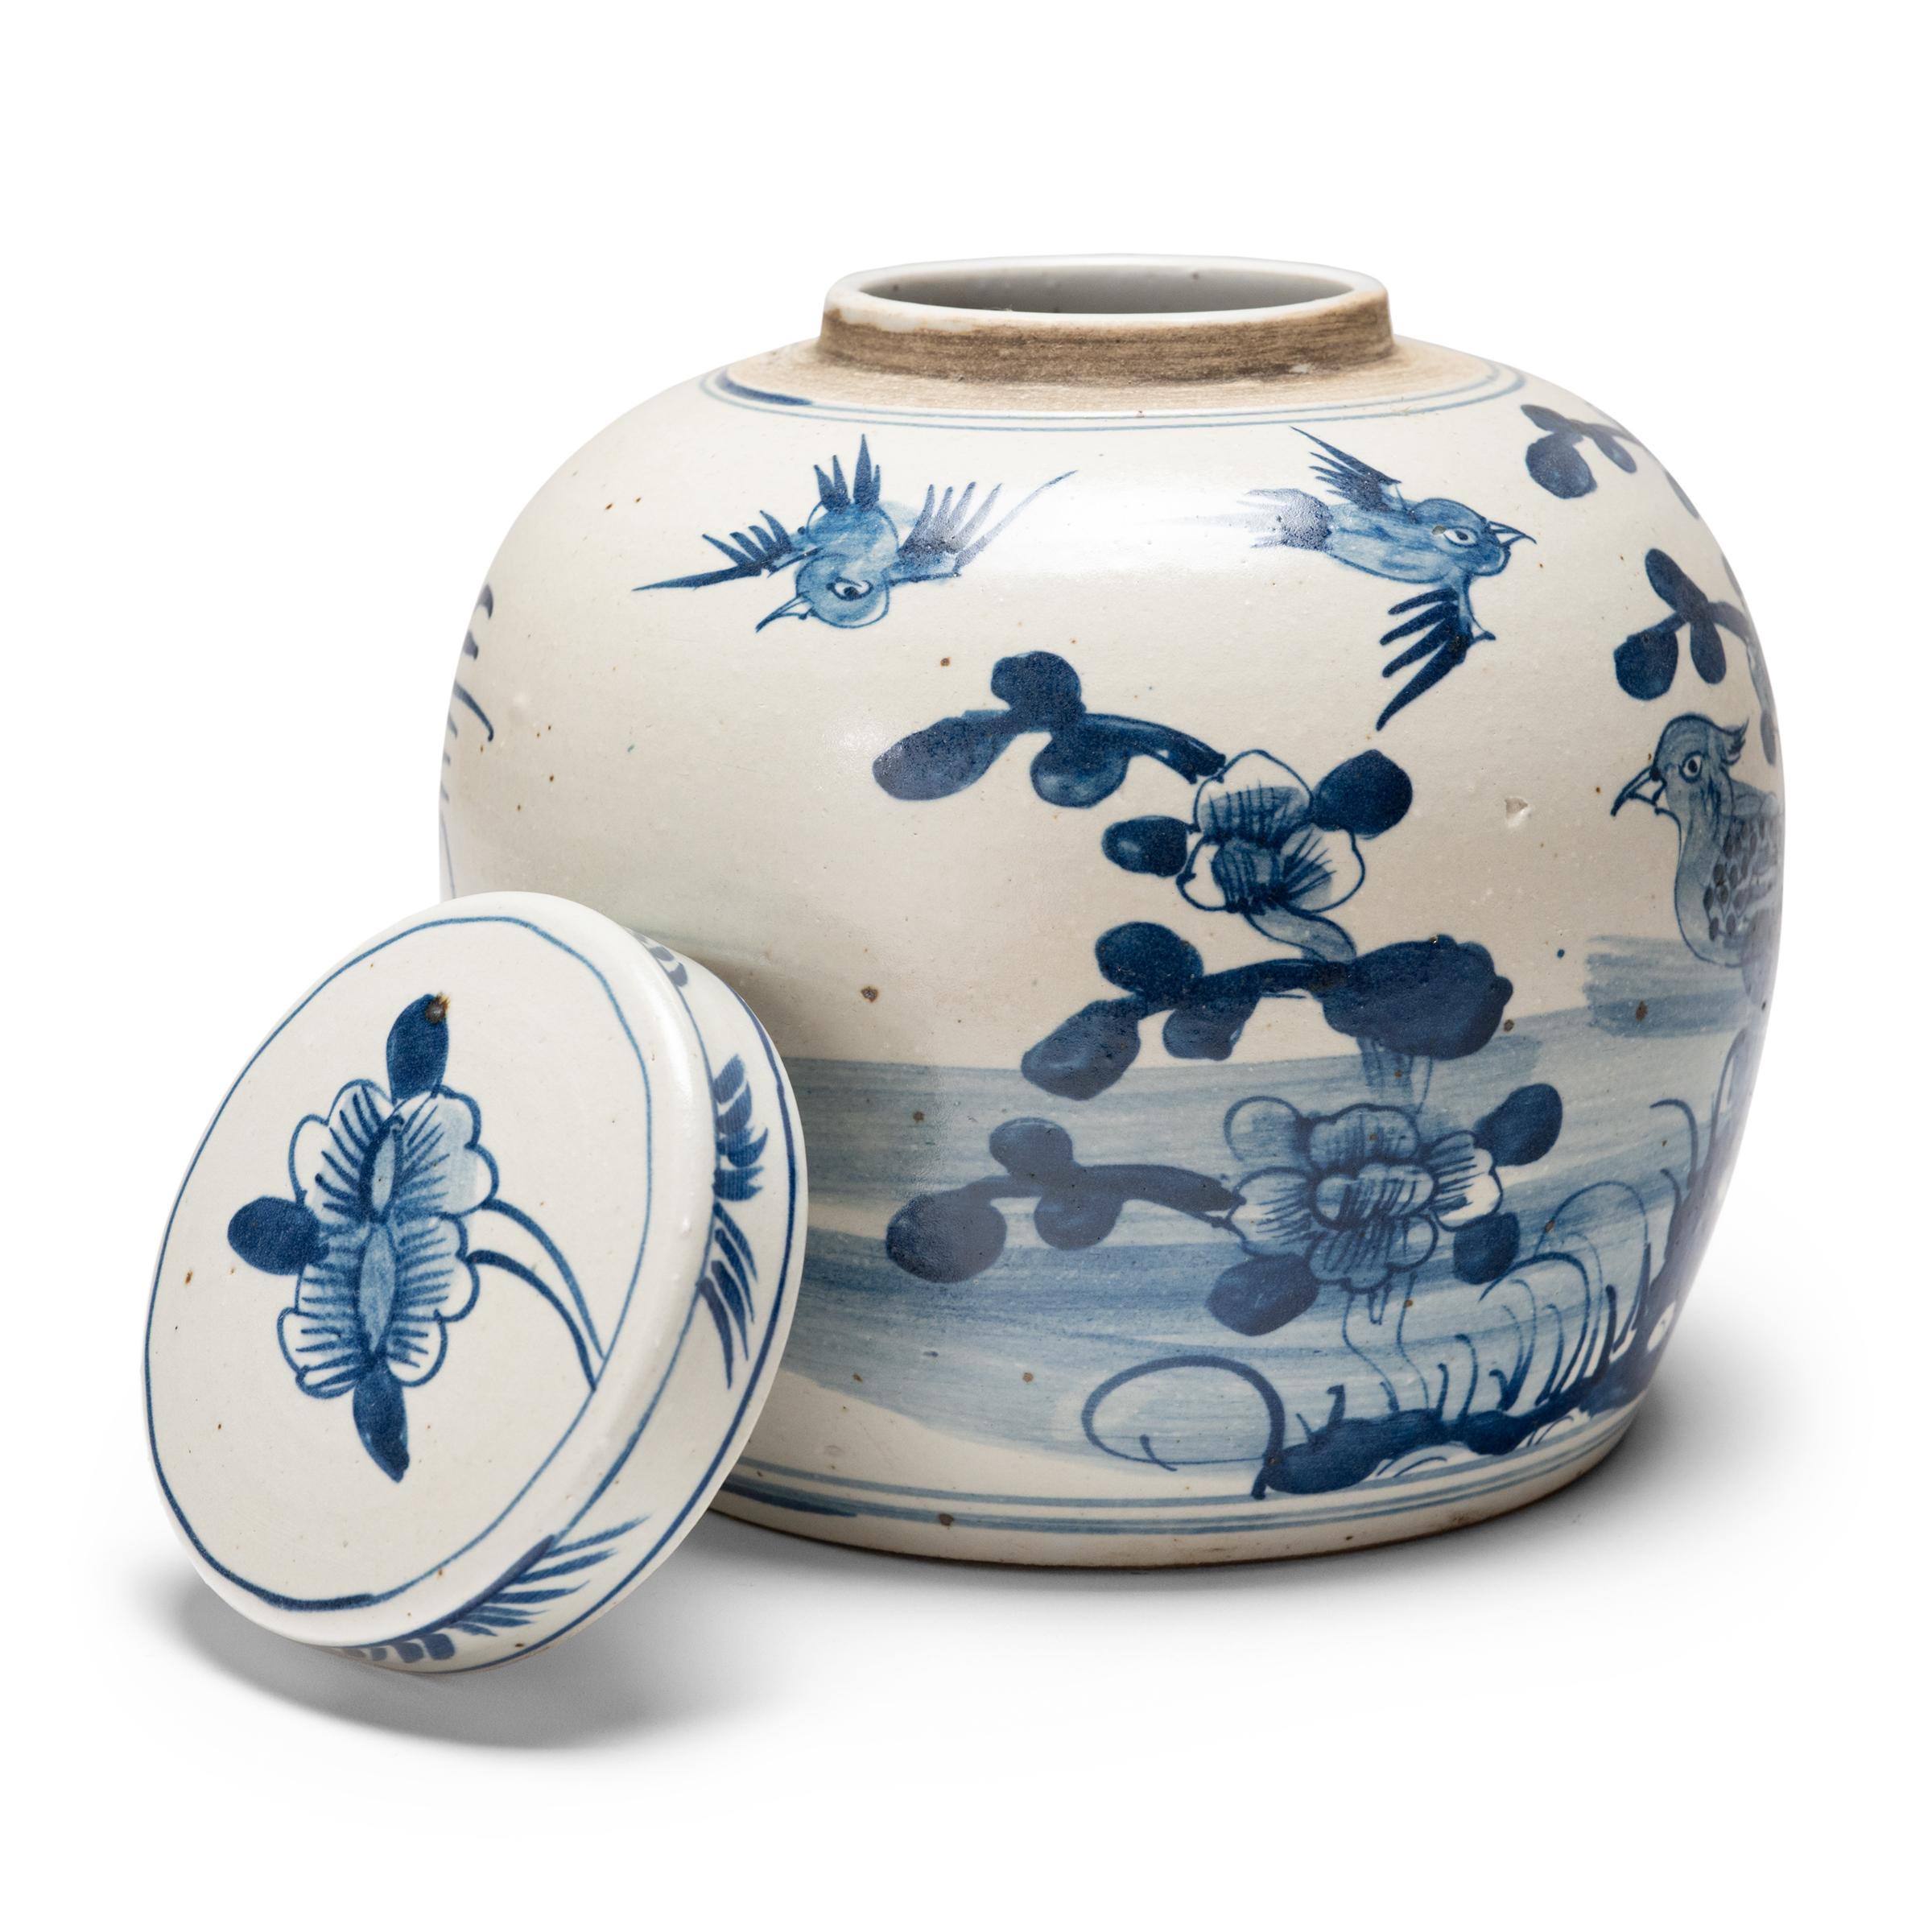 Brushed with dark cobalt blue atop a creamy white field, this Qing-dynasty tea leaf jar beautifully exemplifies the timeless allure of blue-and-white porcelain. The tea jar has a gently tapered form with a wide base and high shoulders that flow into